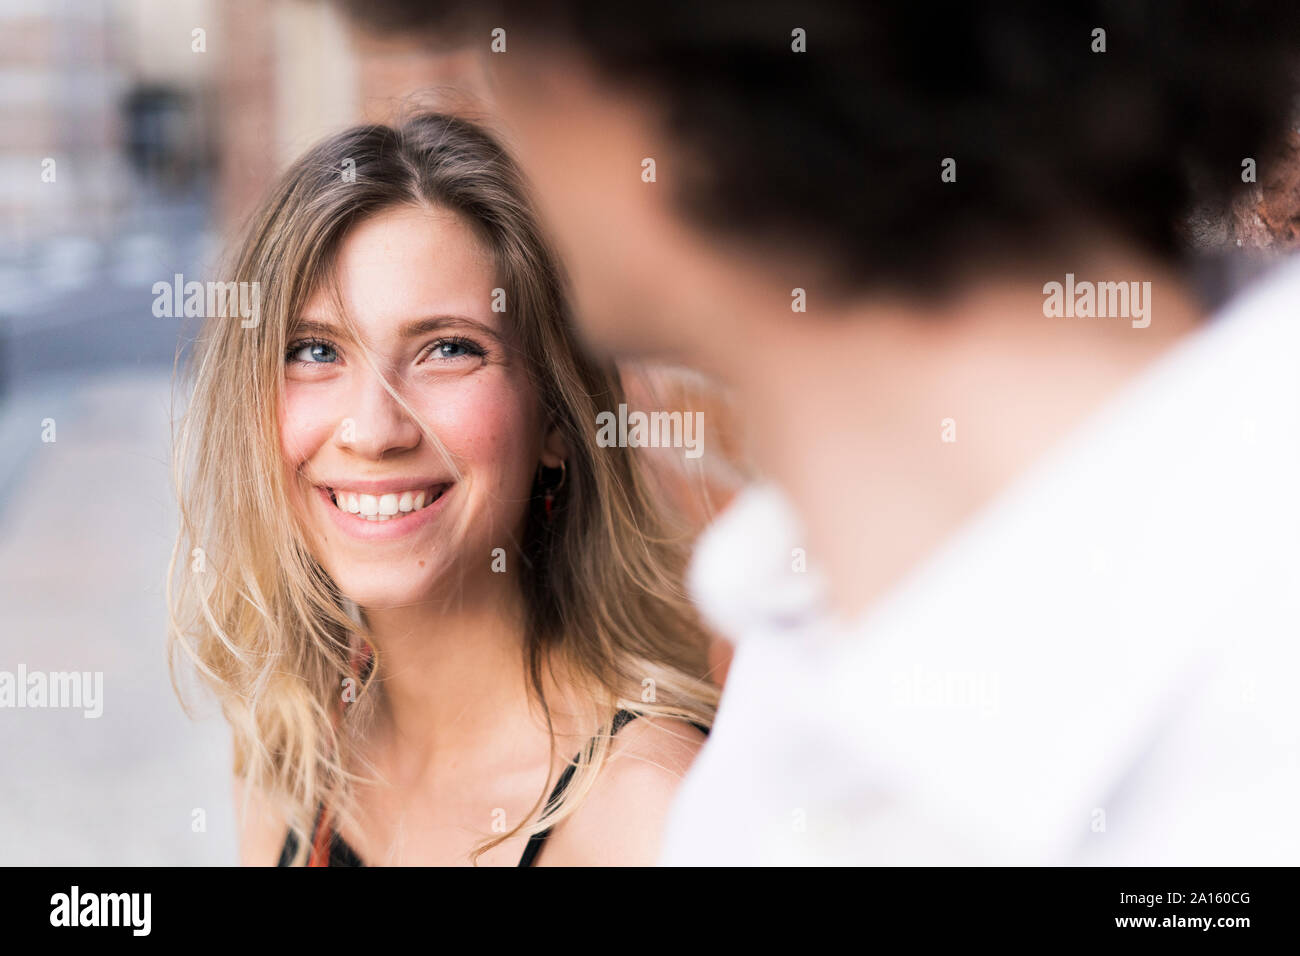 Happy young woman in love looking at boyfriend Stock Photo